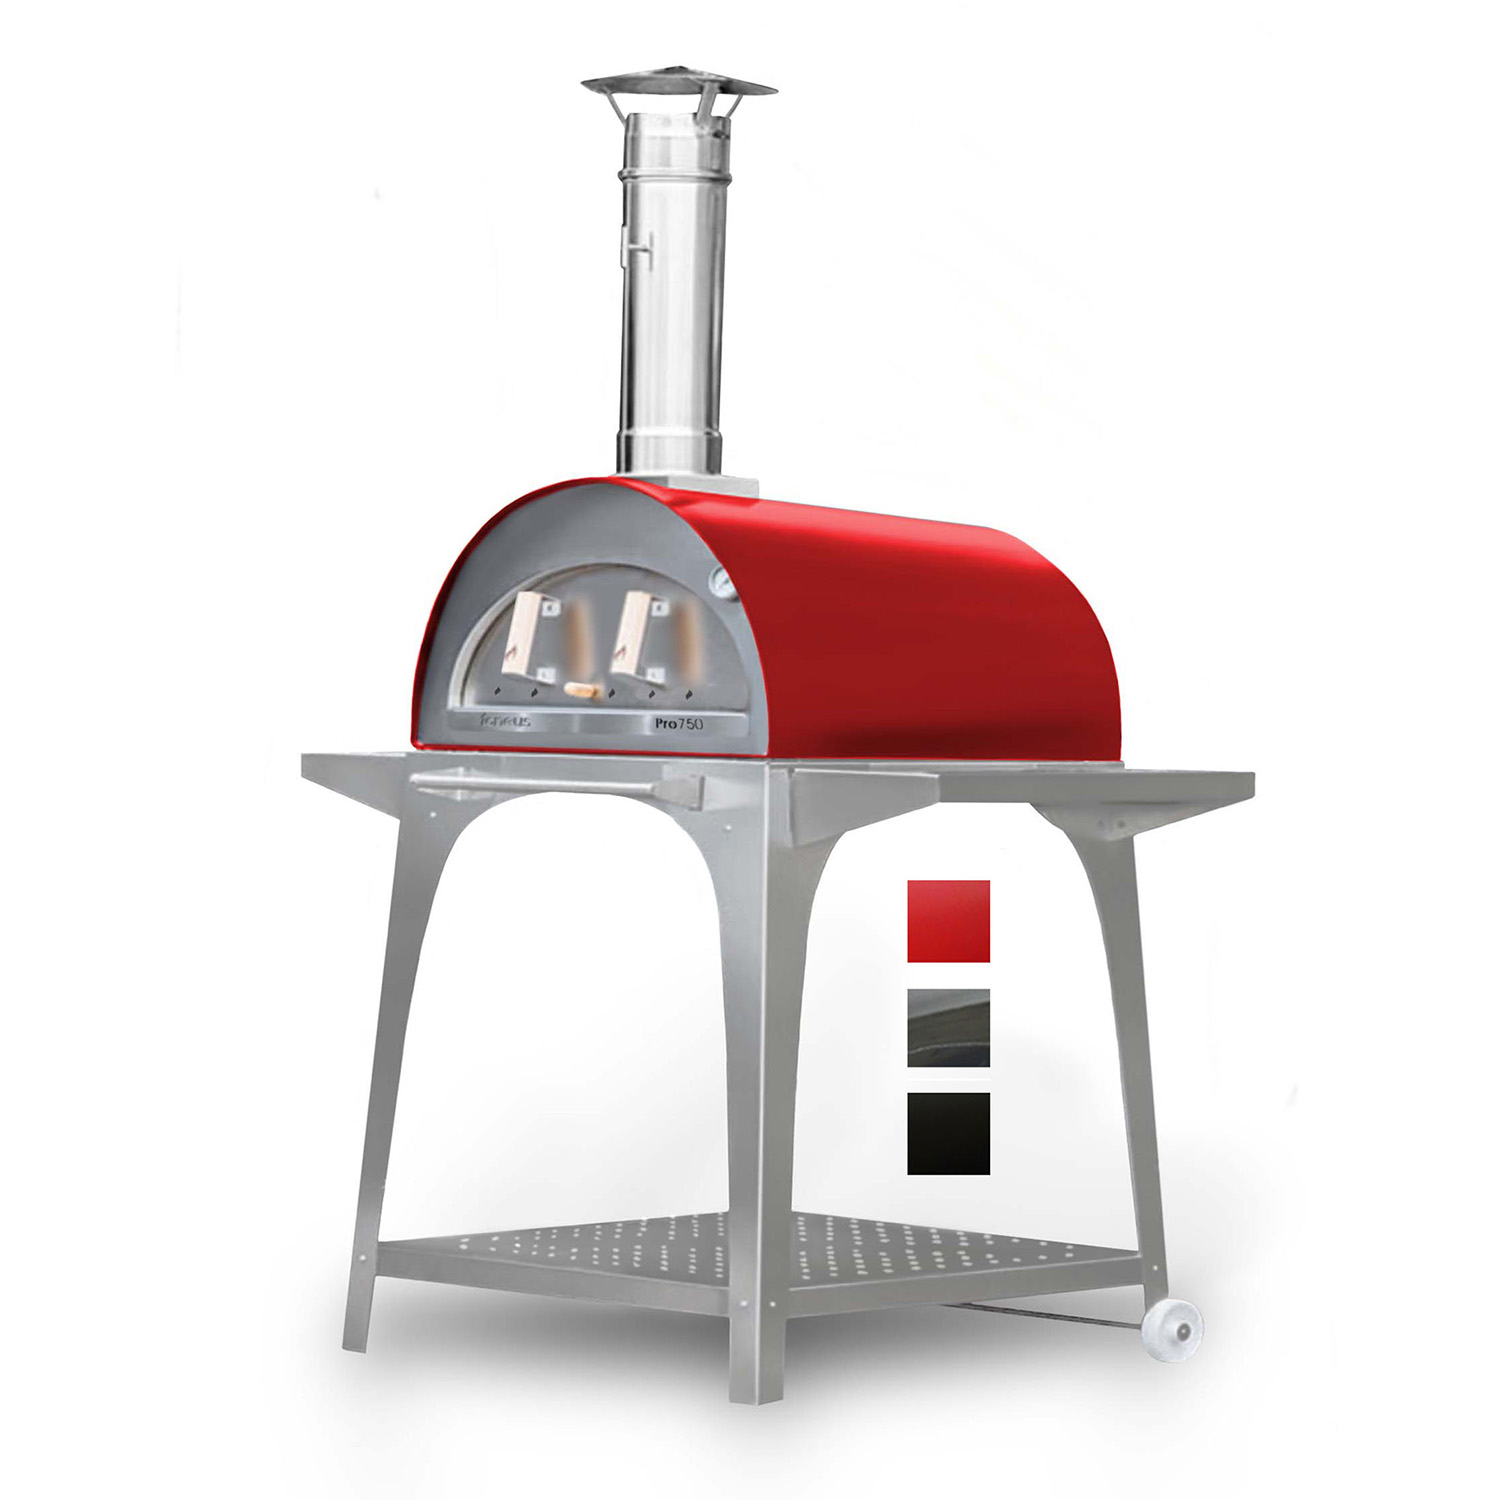 Igneus Pro 750 pizza oven with stand